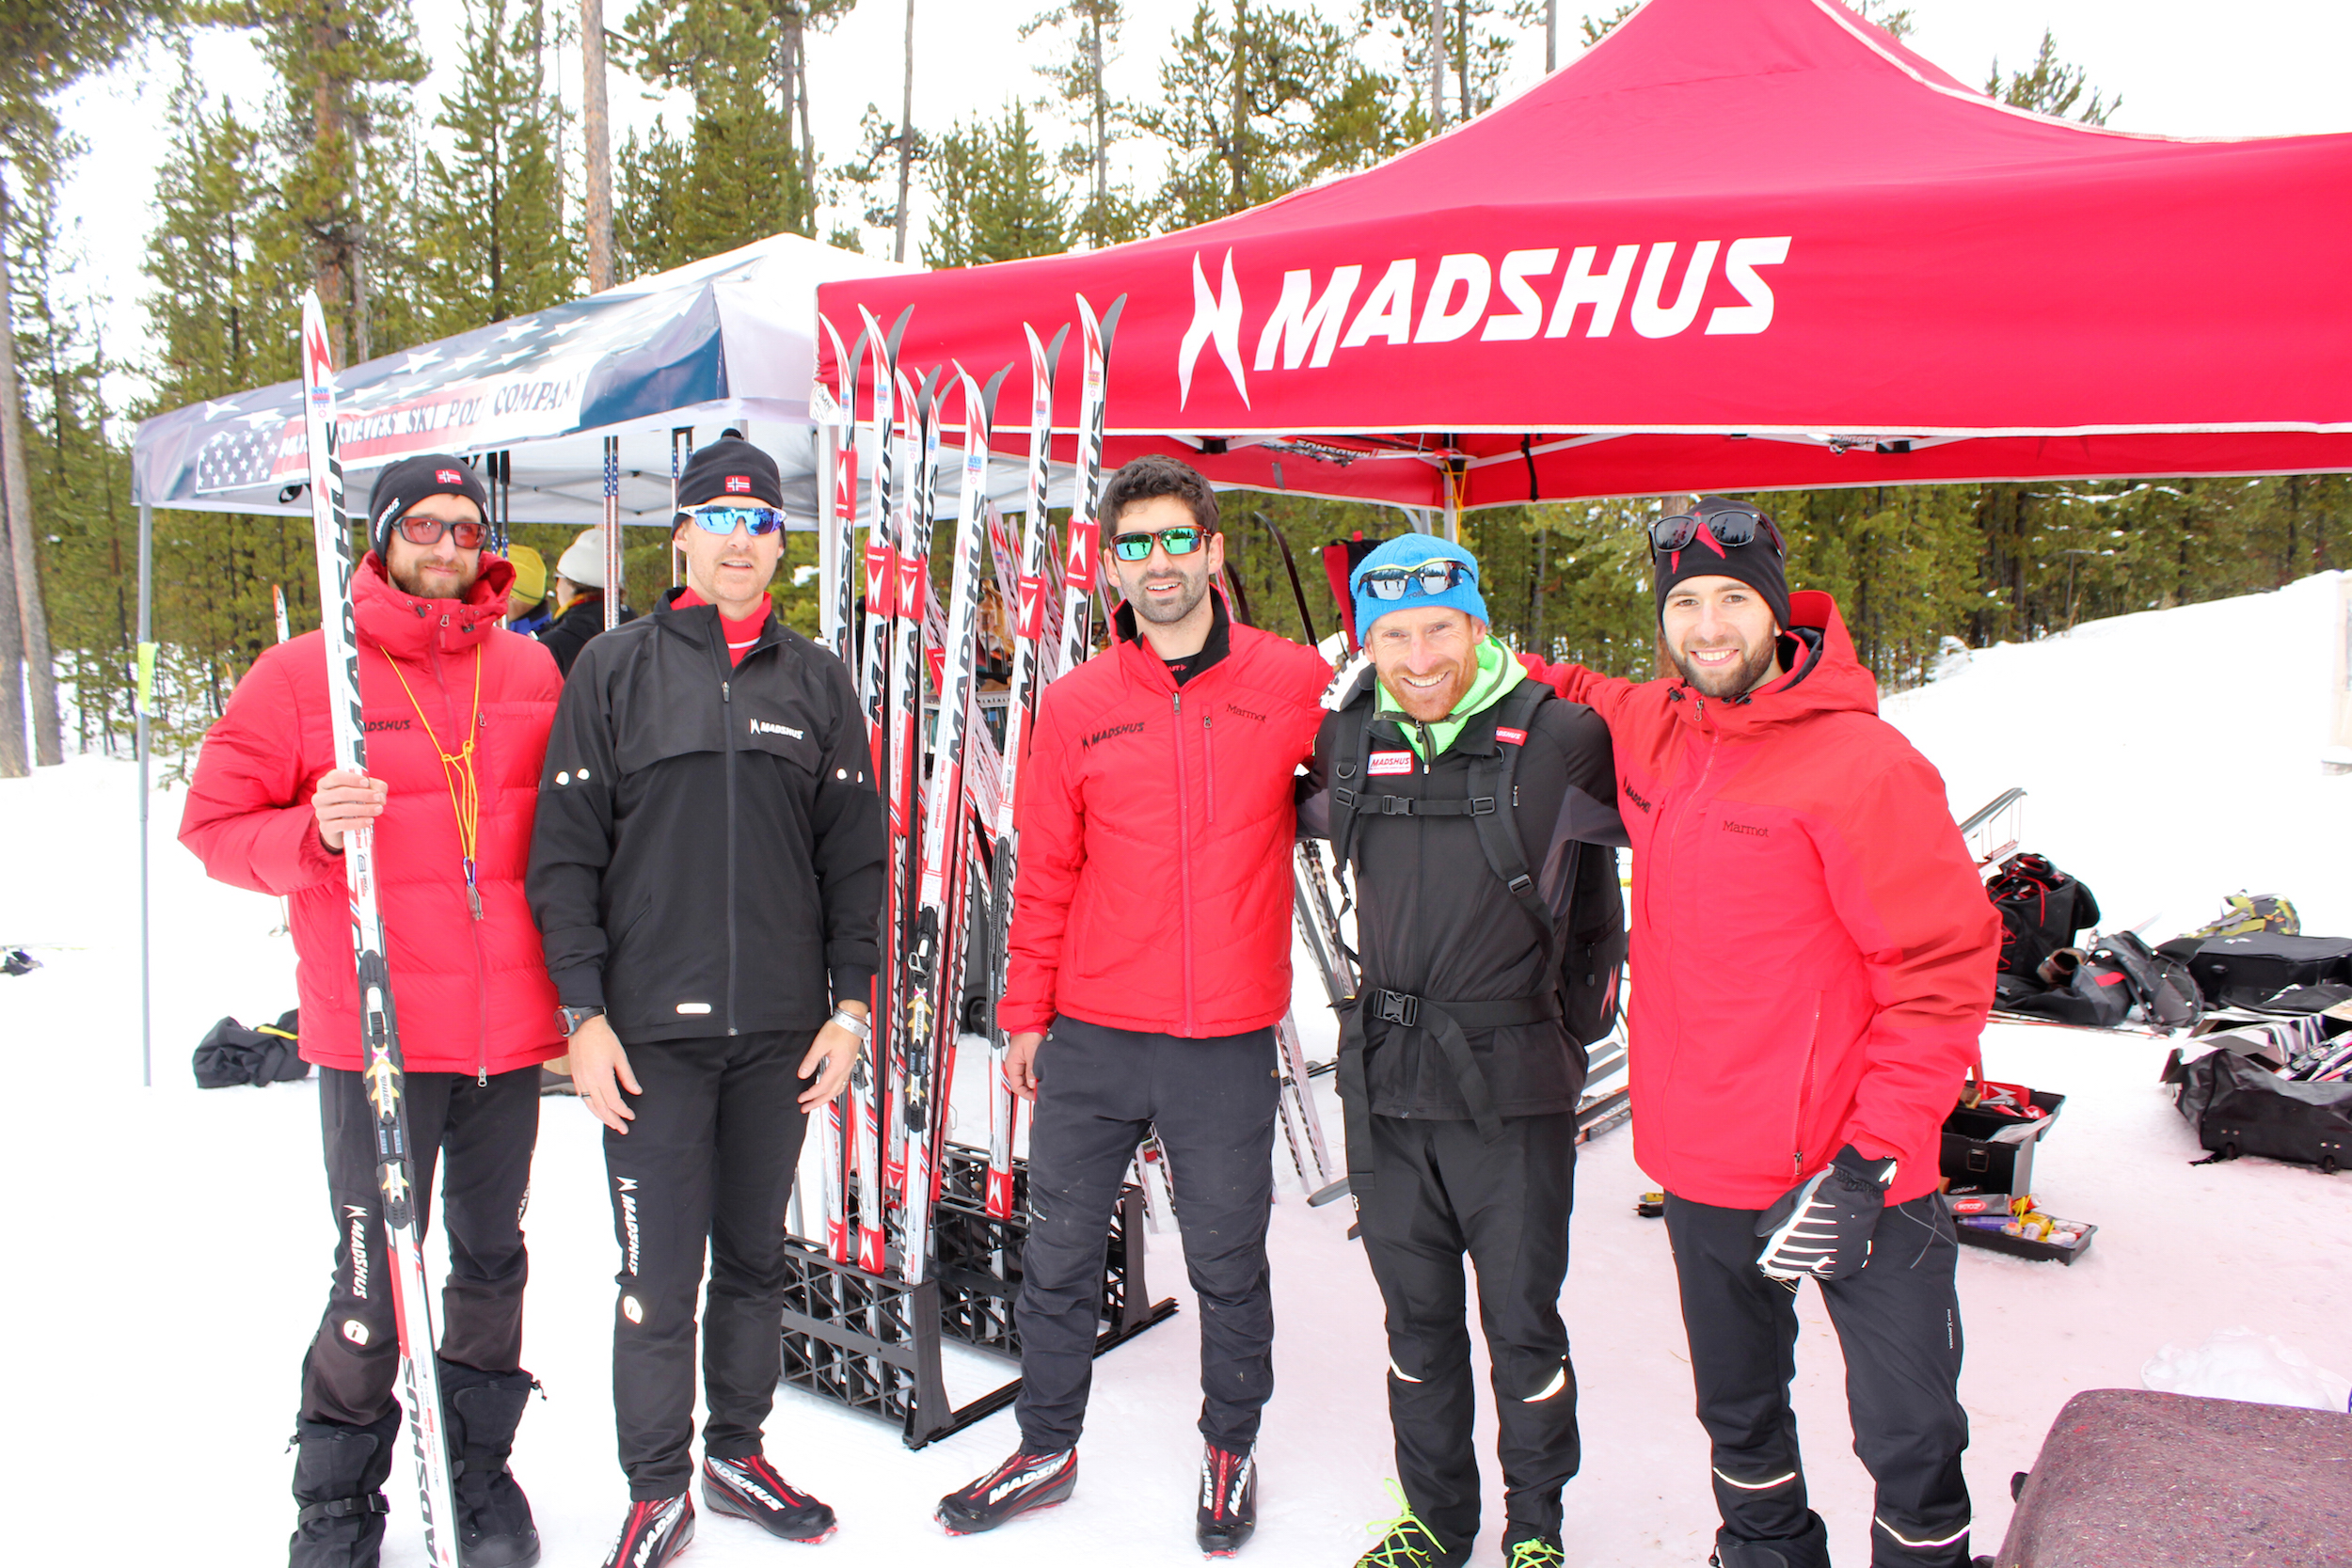 Carmi Schulman, Brian Gregg, and the rest of the Madshus Team at the demo area in West Yellowstone.